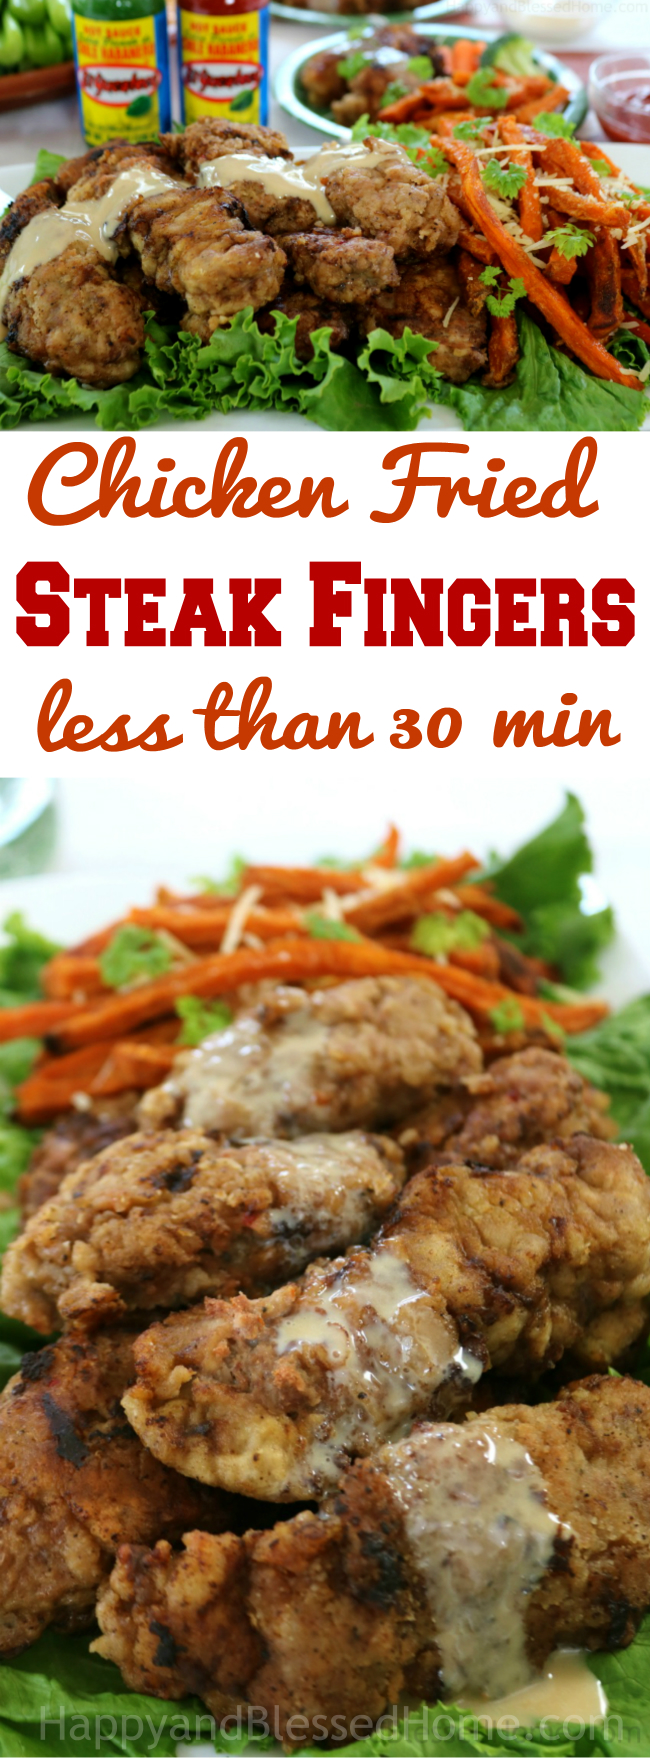 Easy recipe for Chicken Fried Steak Fingers with Hot Sauce - perfect party appetizer or tailgating dish by HappyandBlessedHome.com